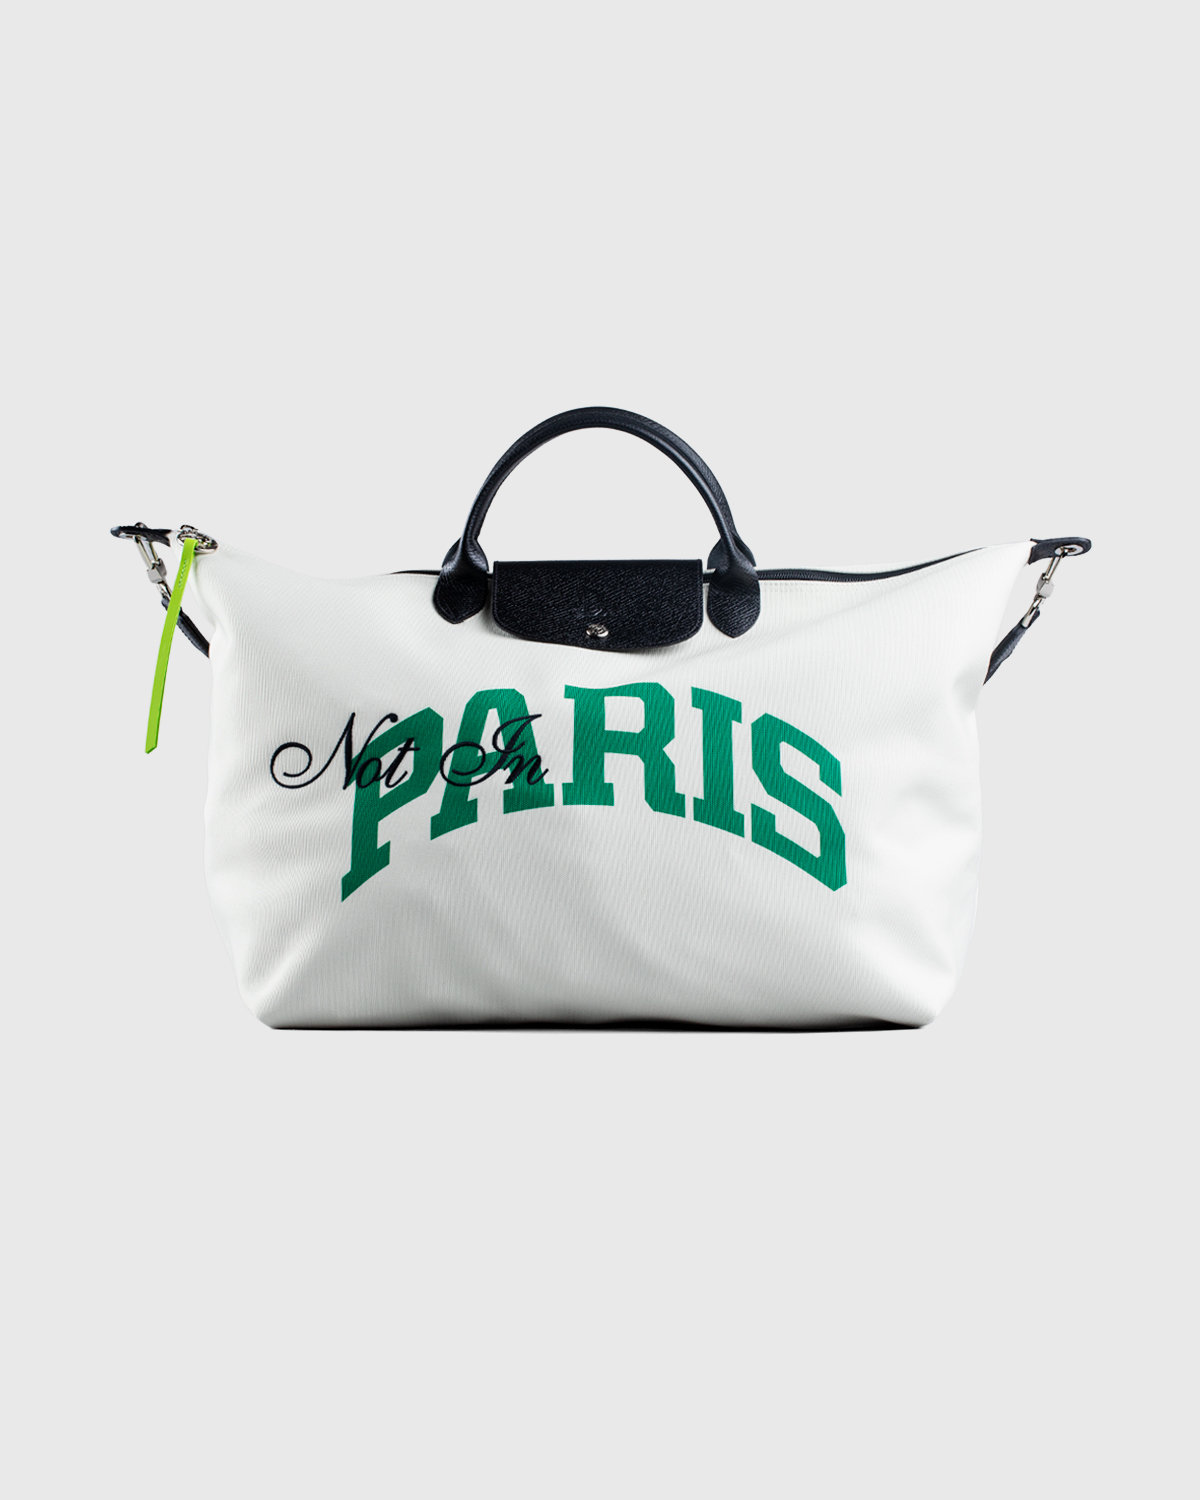 “Not In Paris”: Longchamp Collaborates With Highsnobiety